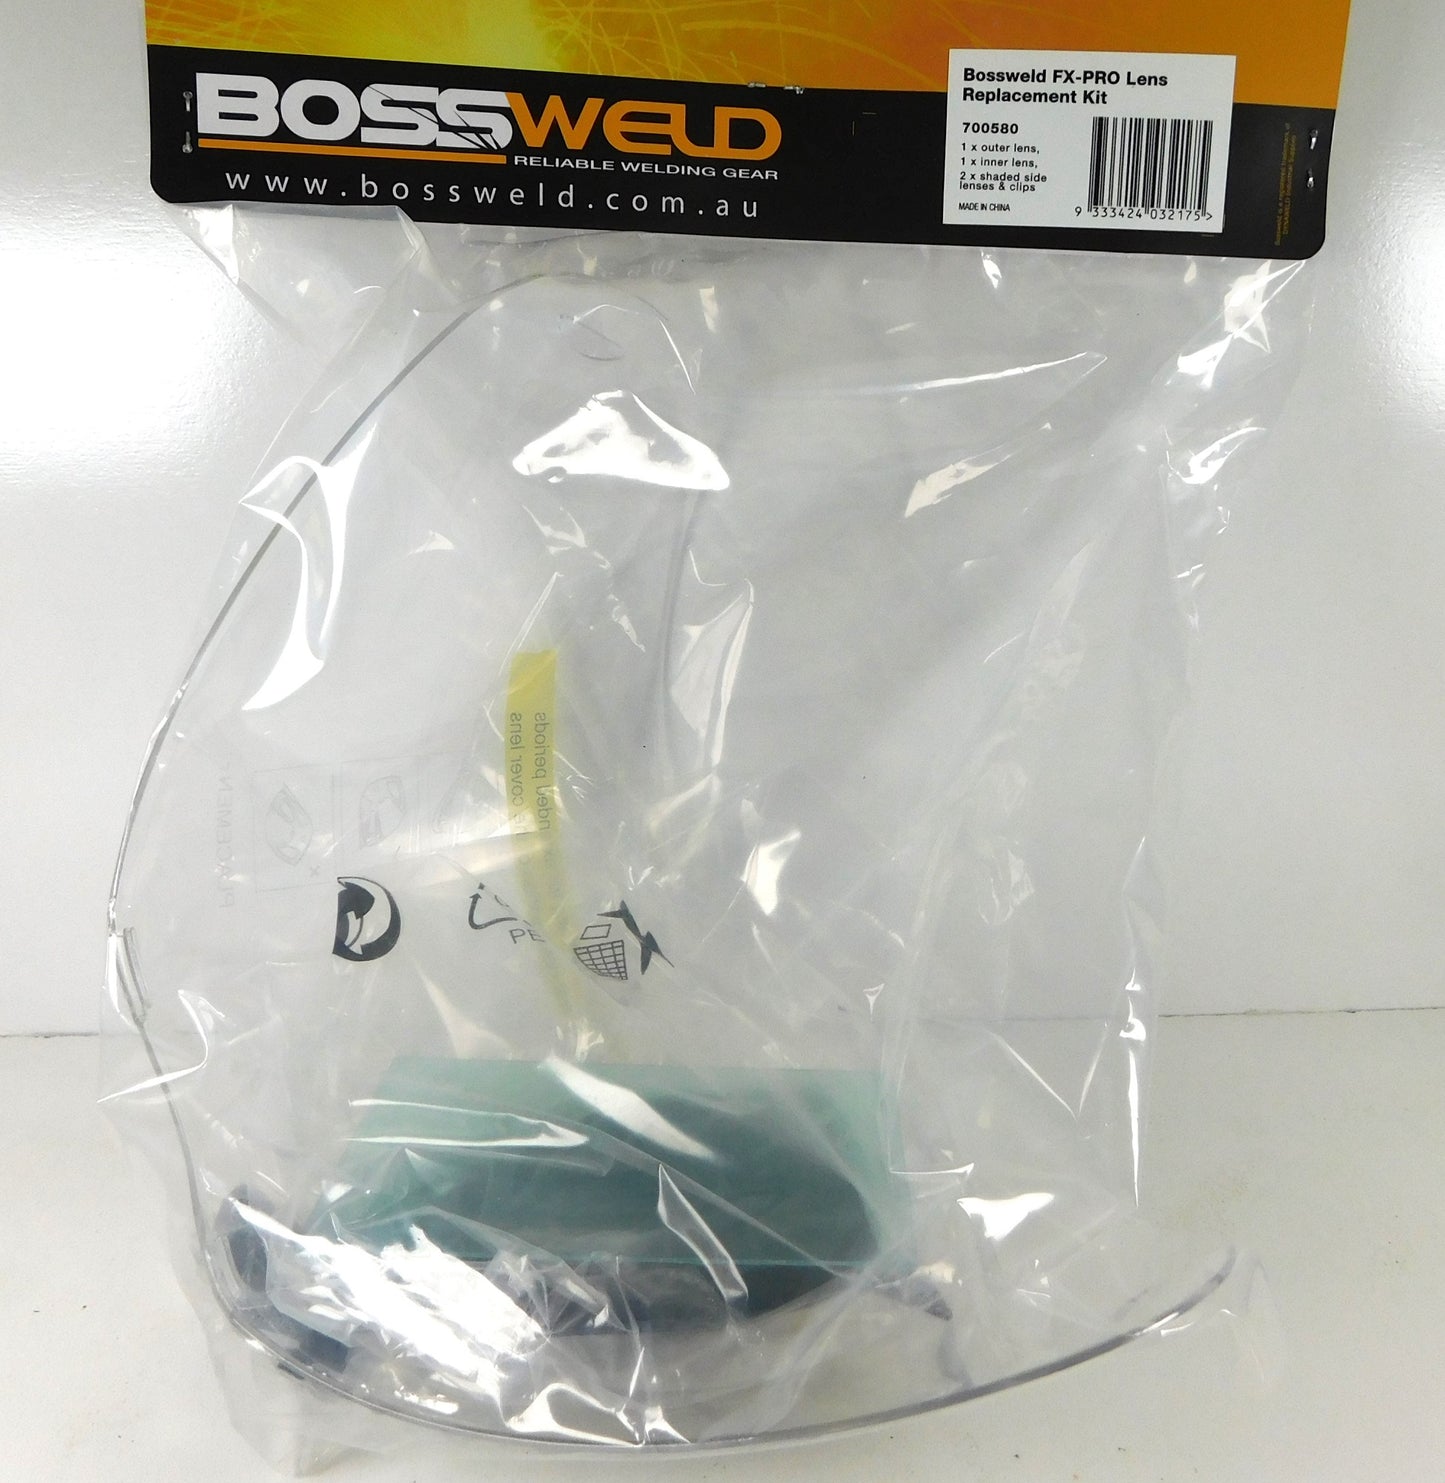 Bossweld FX-PRO Lens Replacement Kit 700580